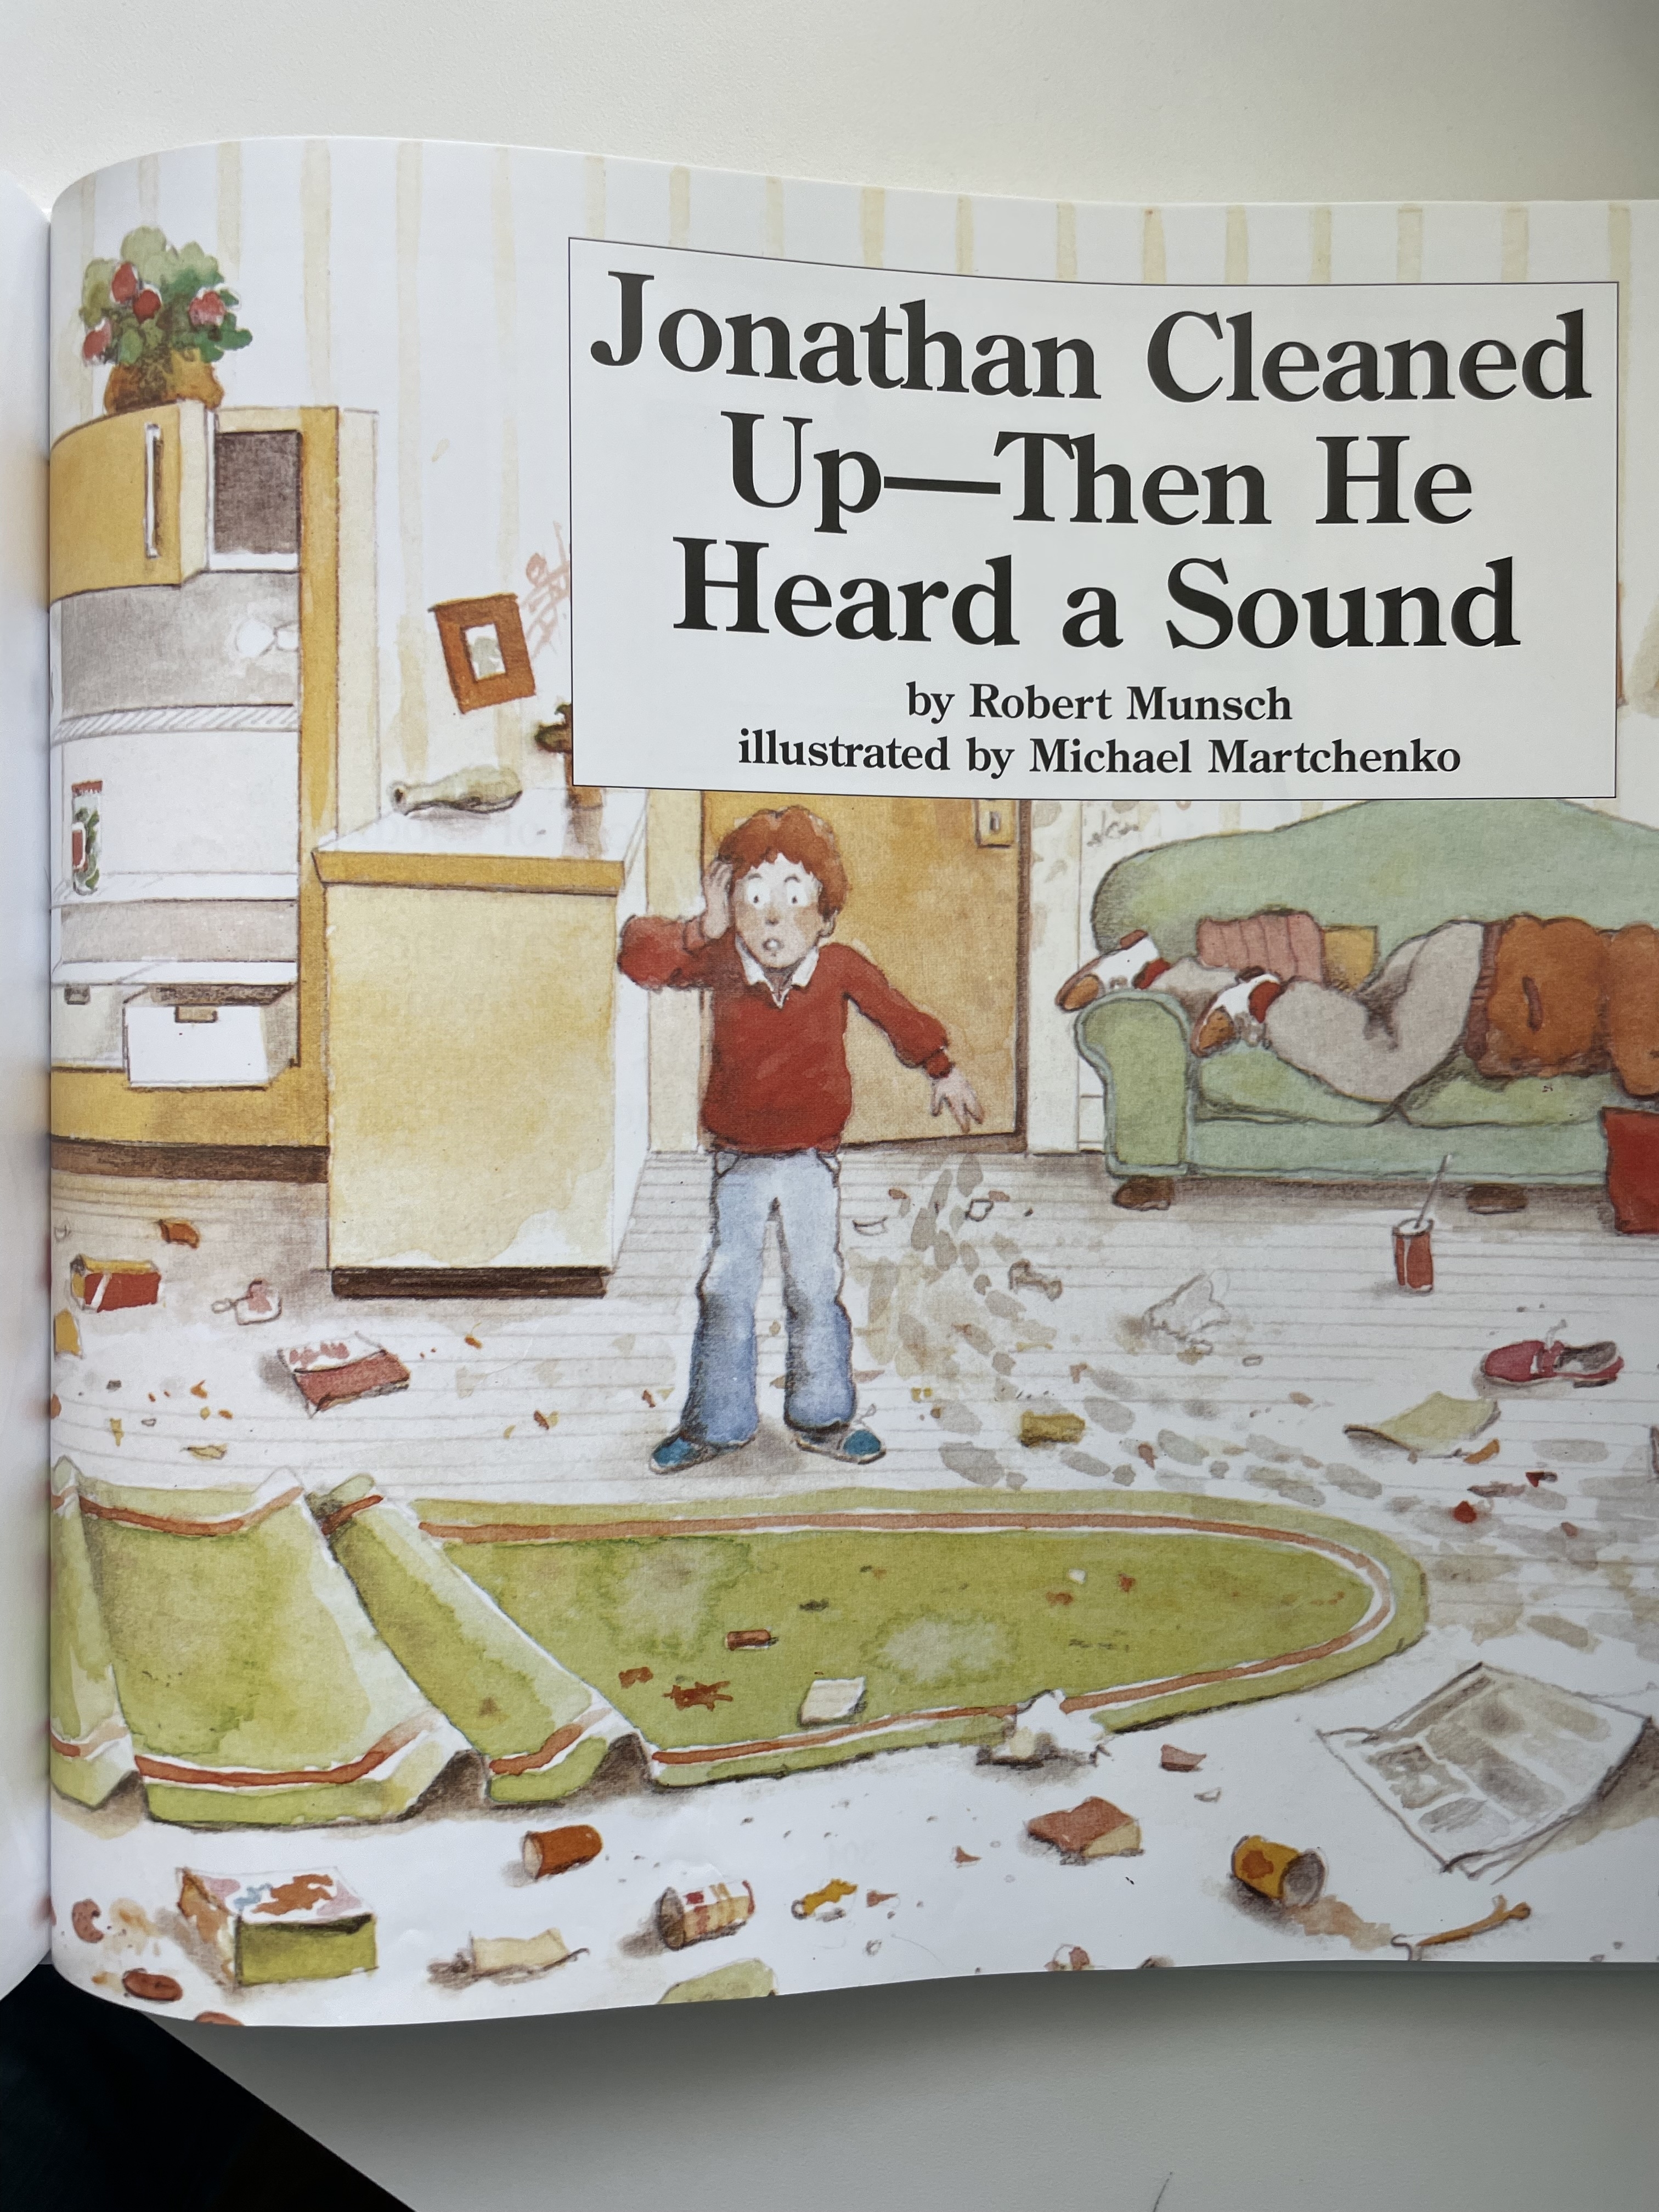 Book page from &quot;Jonathan Cleaned Up—Then He Heard a Sound&quot; showing an illustration of a startled boy in a messy room